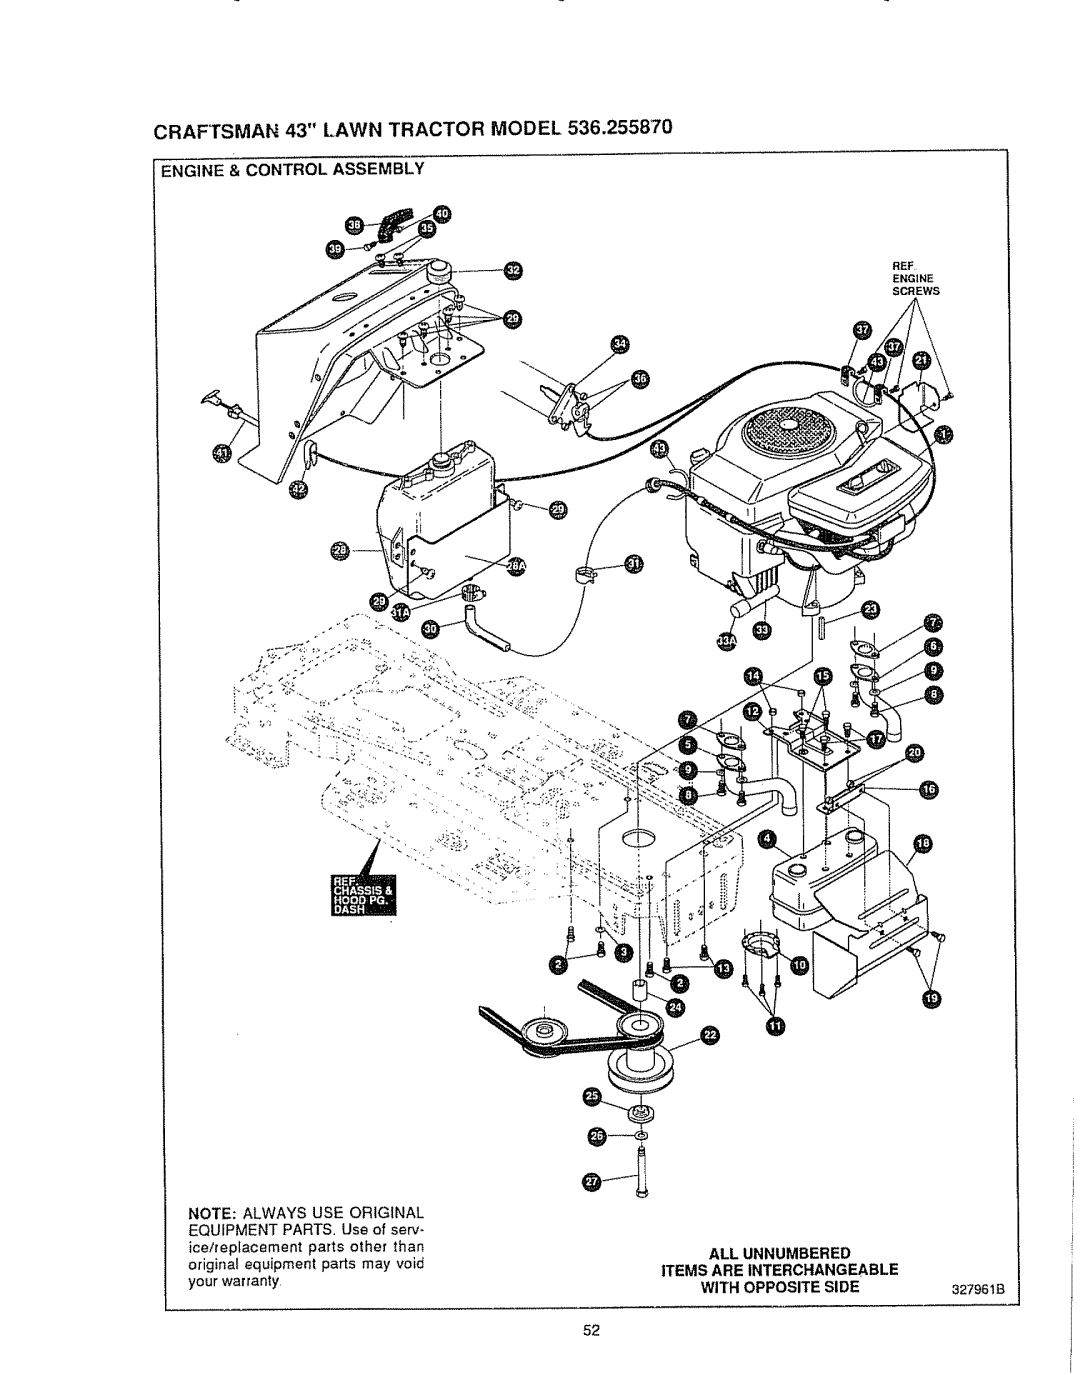 Sears 536.25587 CRAFTSMAN 43 LAWN TRACTOR MODEL, Engine & Control Assembly, Note: Always, Use Original, ice/replacement 